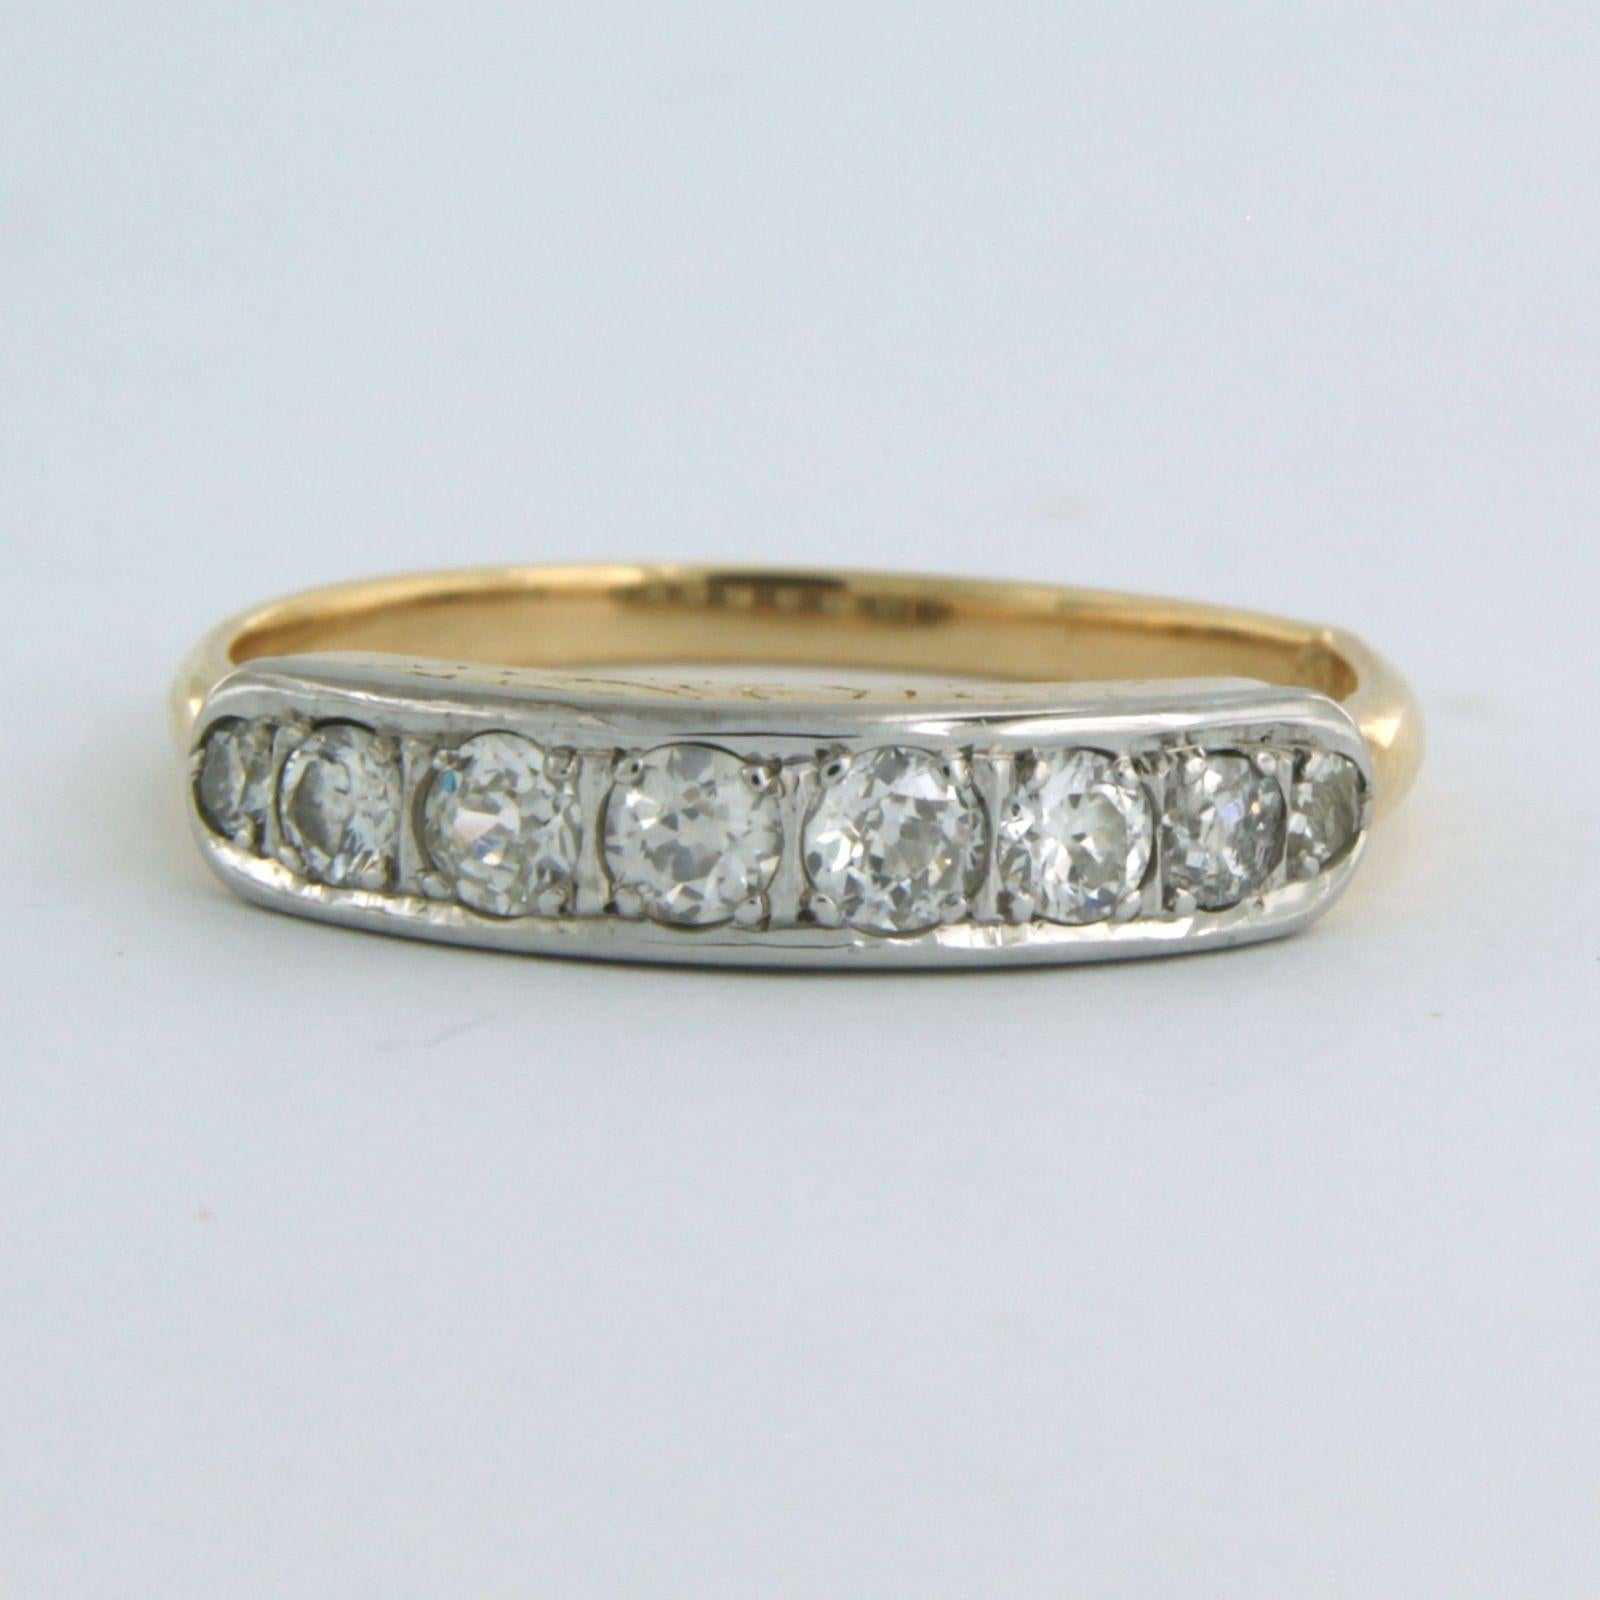 14k bicolour gold ring set with old European cut diamond up to. 0.50ct - F/G - VS/SI - ring size U.S. 8.5 - EU. 18.5 (58)

detailed description:

the top of the ring is 4.0 mm wide

weight 2.9 grams

ring size US 8.5 - EU. 18.5 (58), ring can be